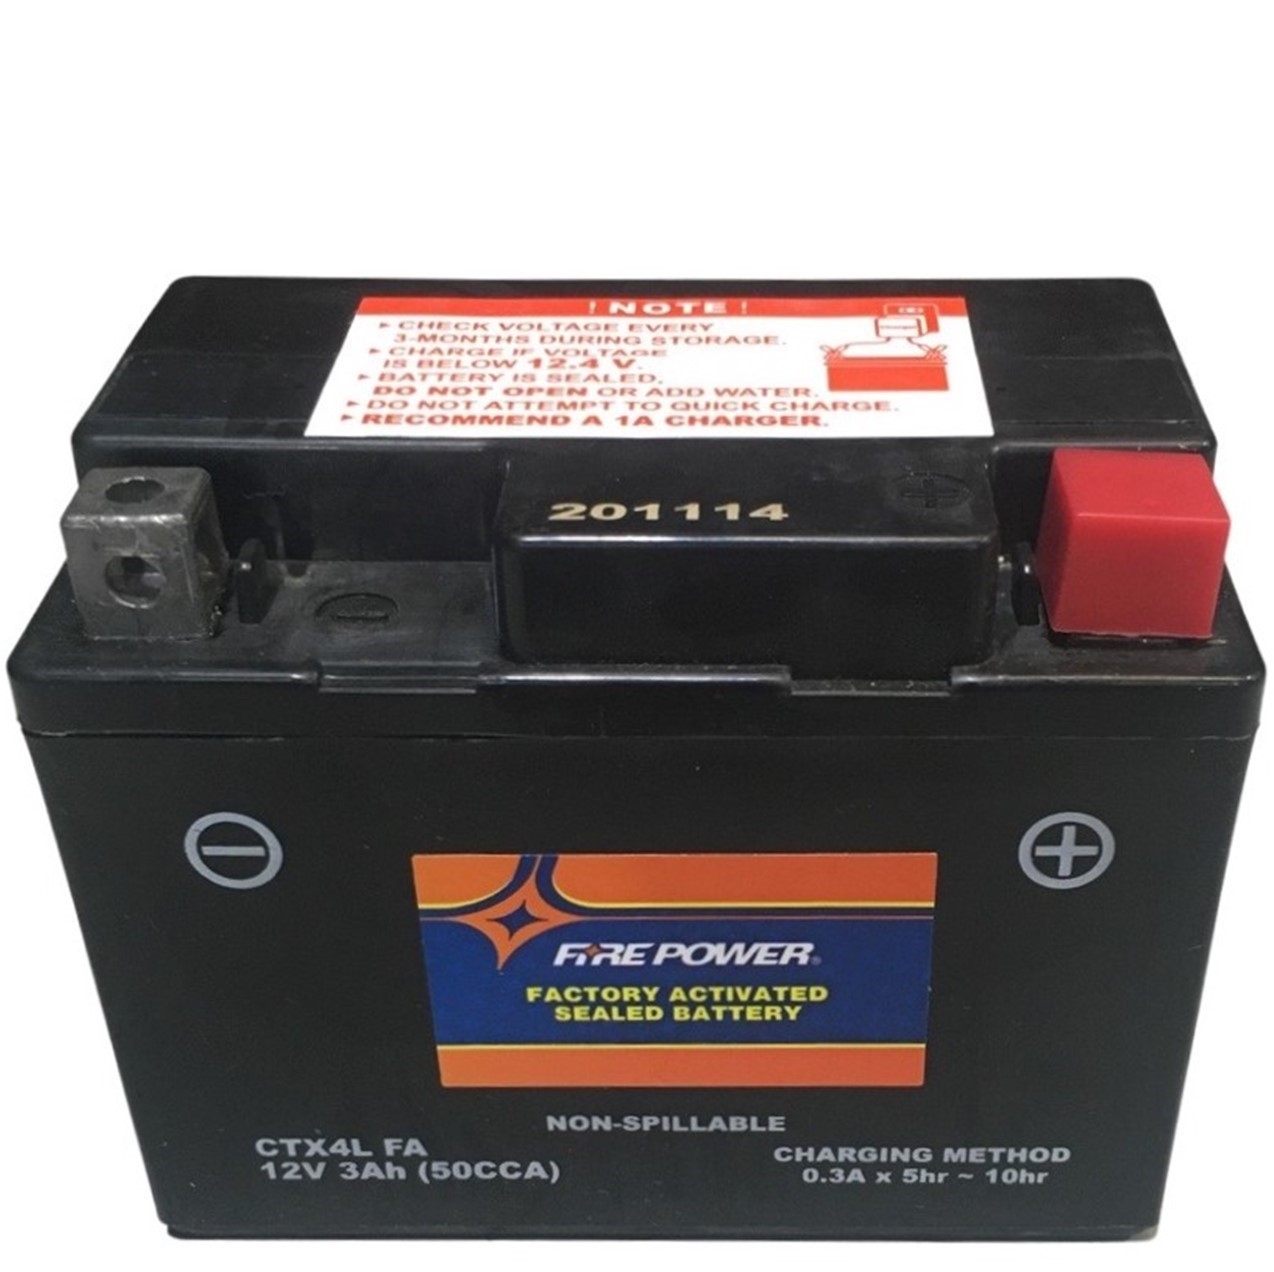 CTX4L FA Fire Power Battery Sealed Maintenance Free L=4 3/8" W=2.75" H=3 3/8" - Click Image to Close